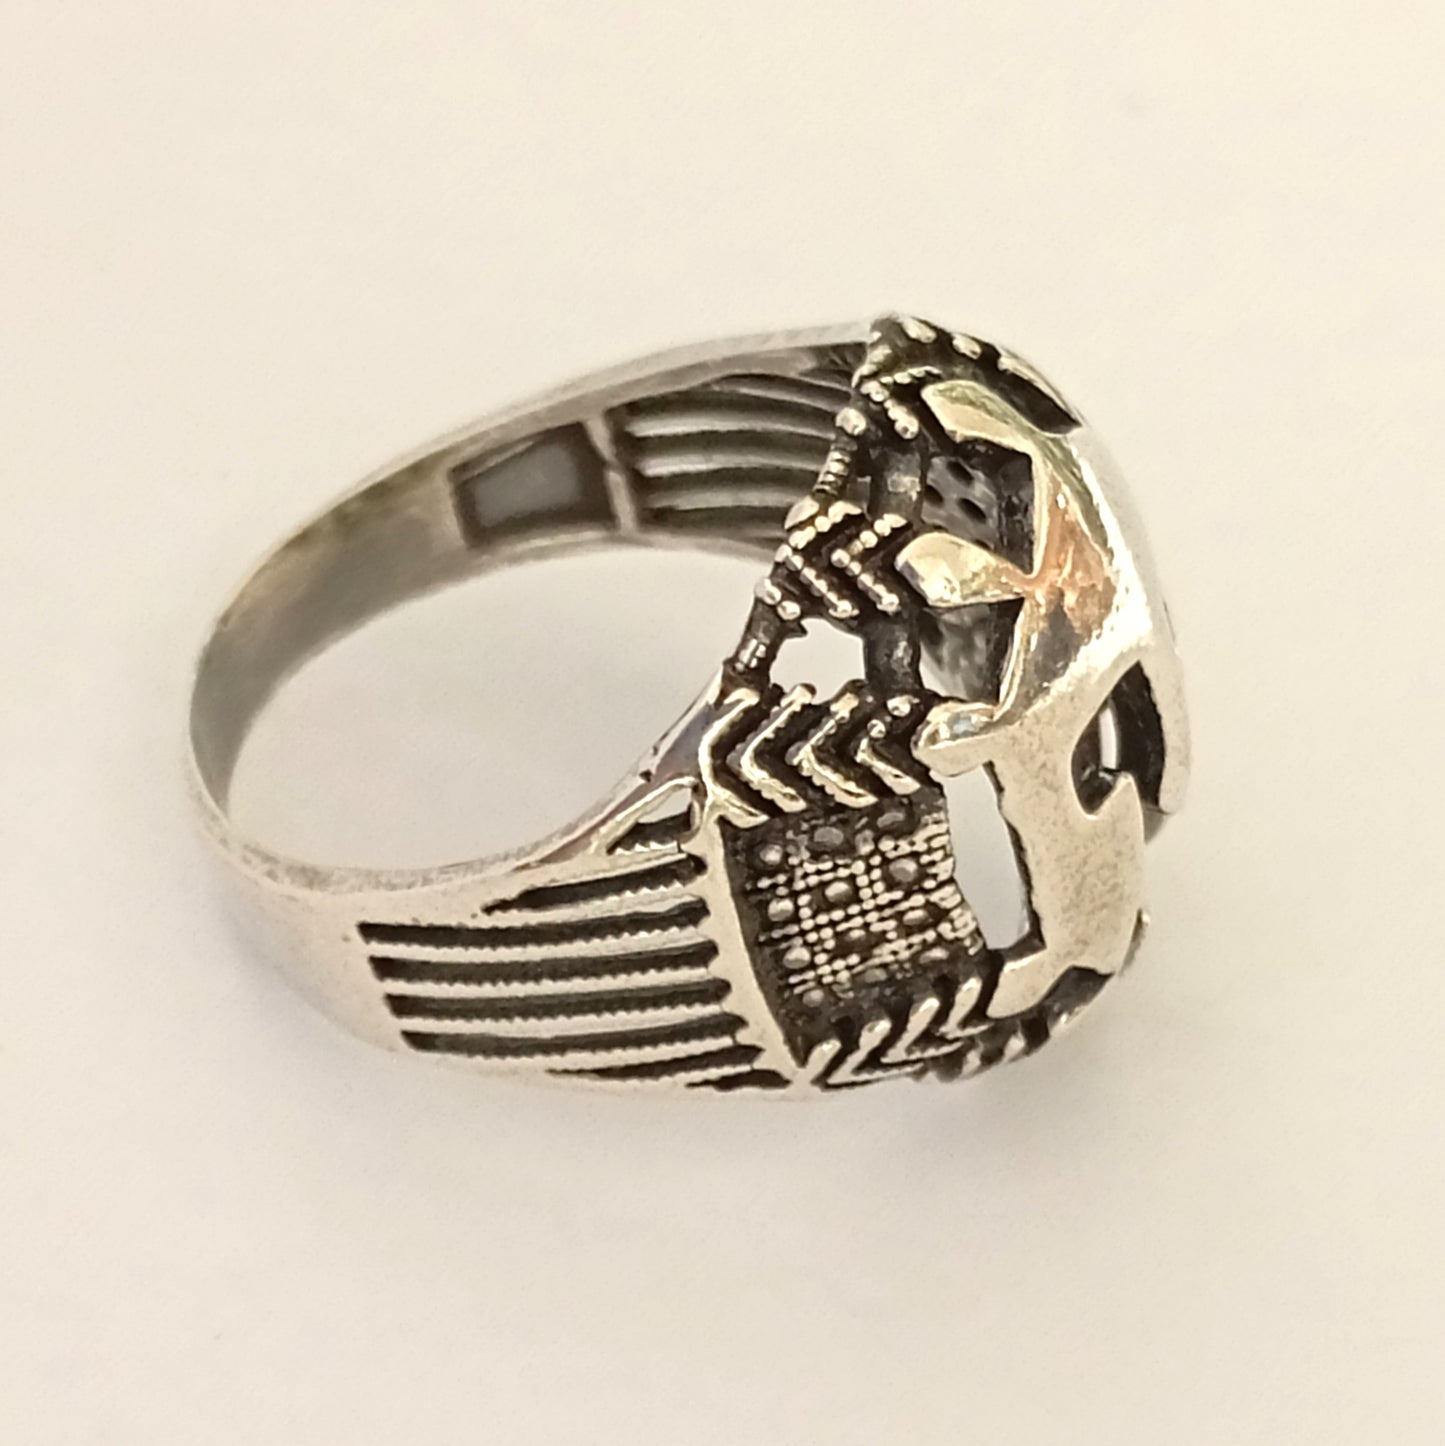 Spartan Helmet - King Leonidas - 300 Spartans - Battle of Thermopylae - 480 BC - Ring - Size EU 64 - Size US 10 1/2 - 925 Sterling Silver